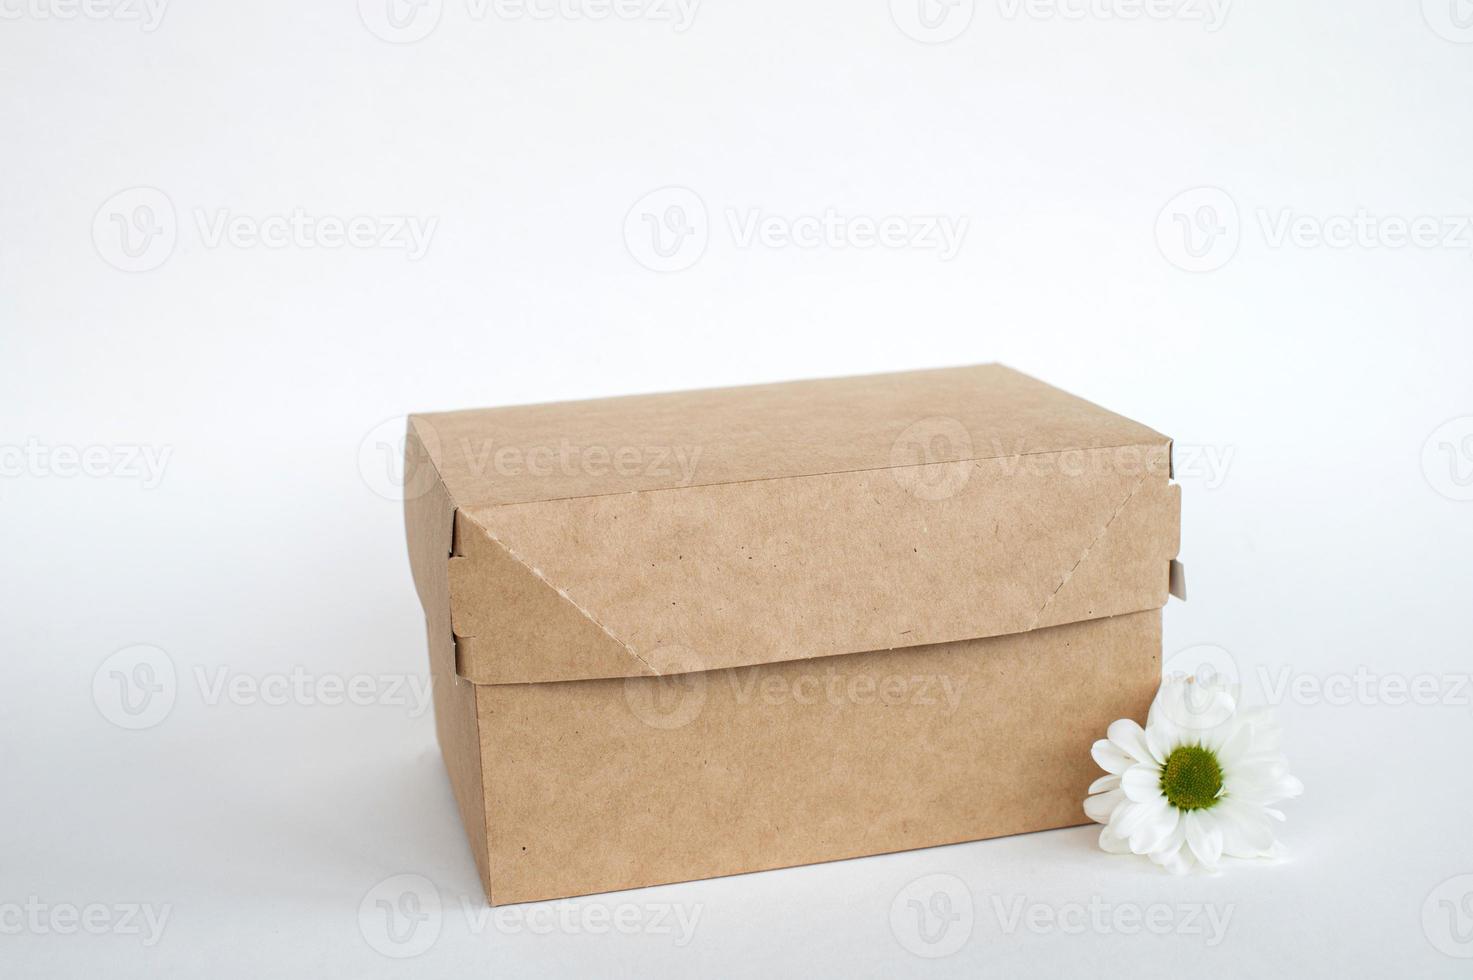 Kraft box mockup, lunchbox, eco friendly packaging with place for text, isolated food box photo